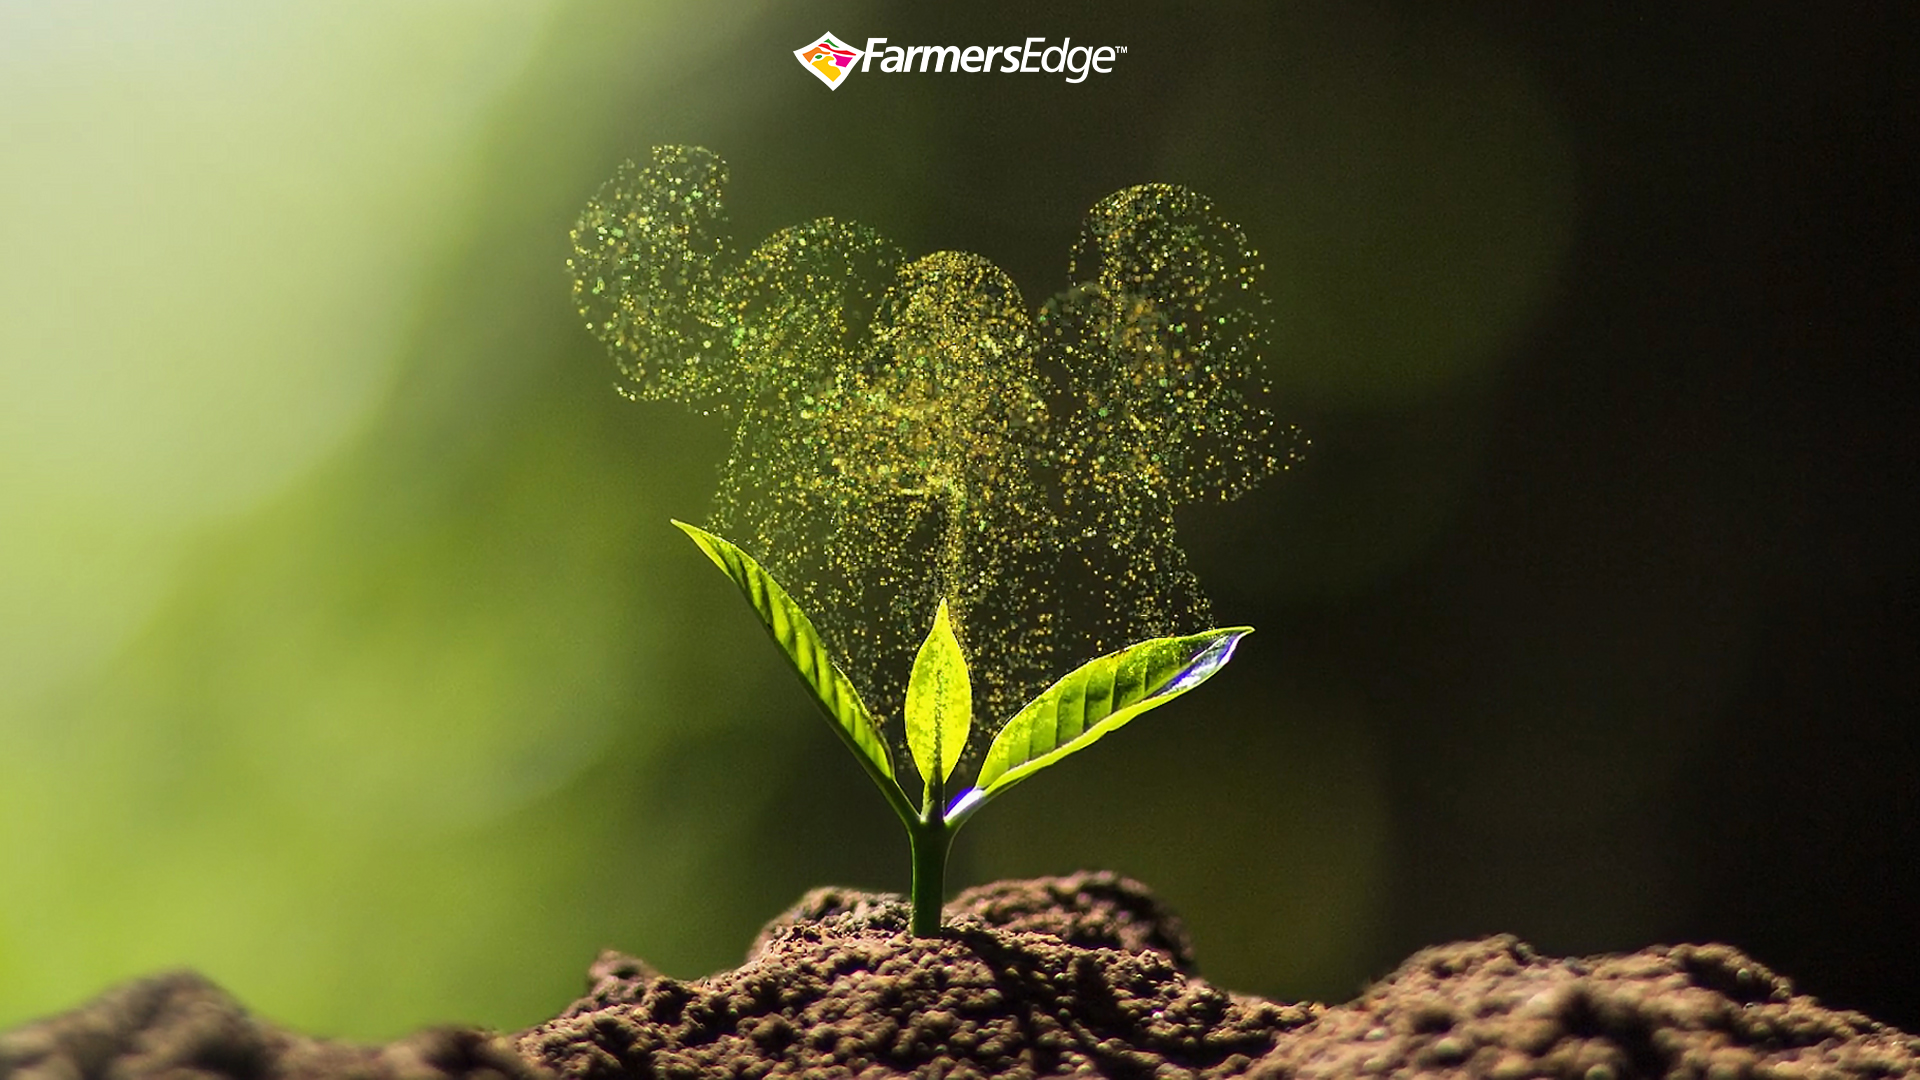 Farmers Edge Helps Farmers in North America Create Millions of Potential New Carbon Offsets